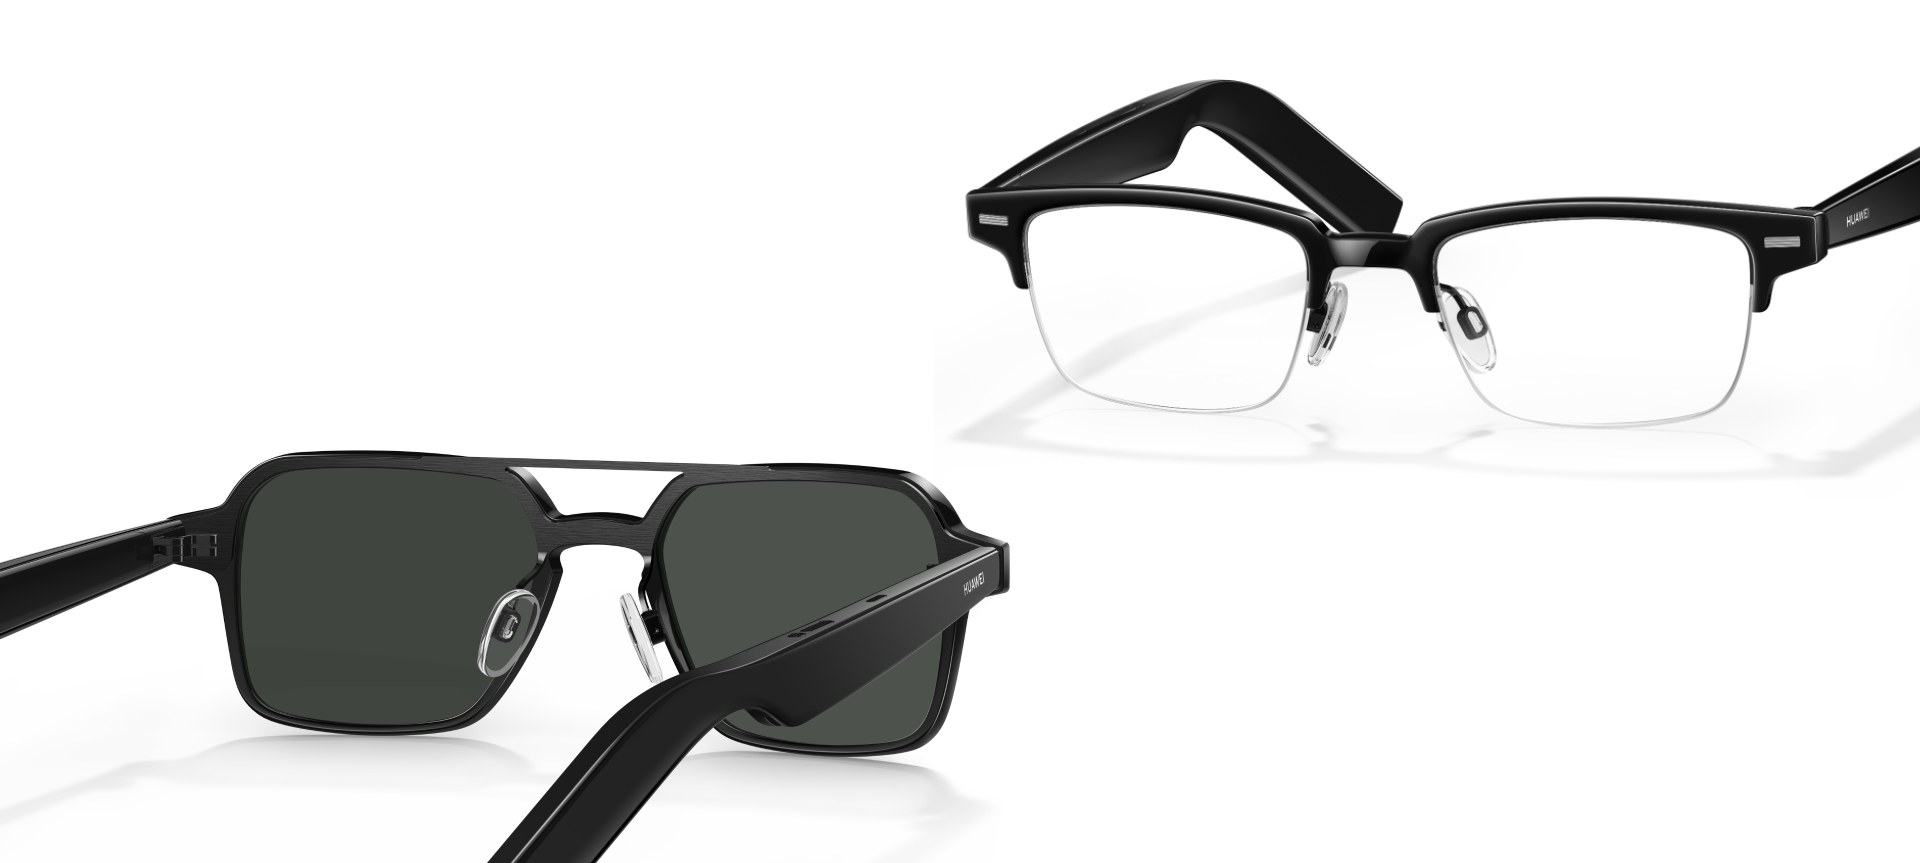 Huawei Eyewear 2 smart glasses with speakers and Zeiss lenses have